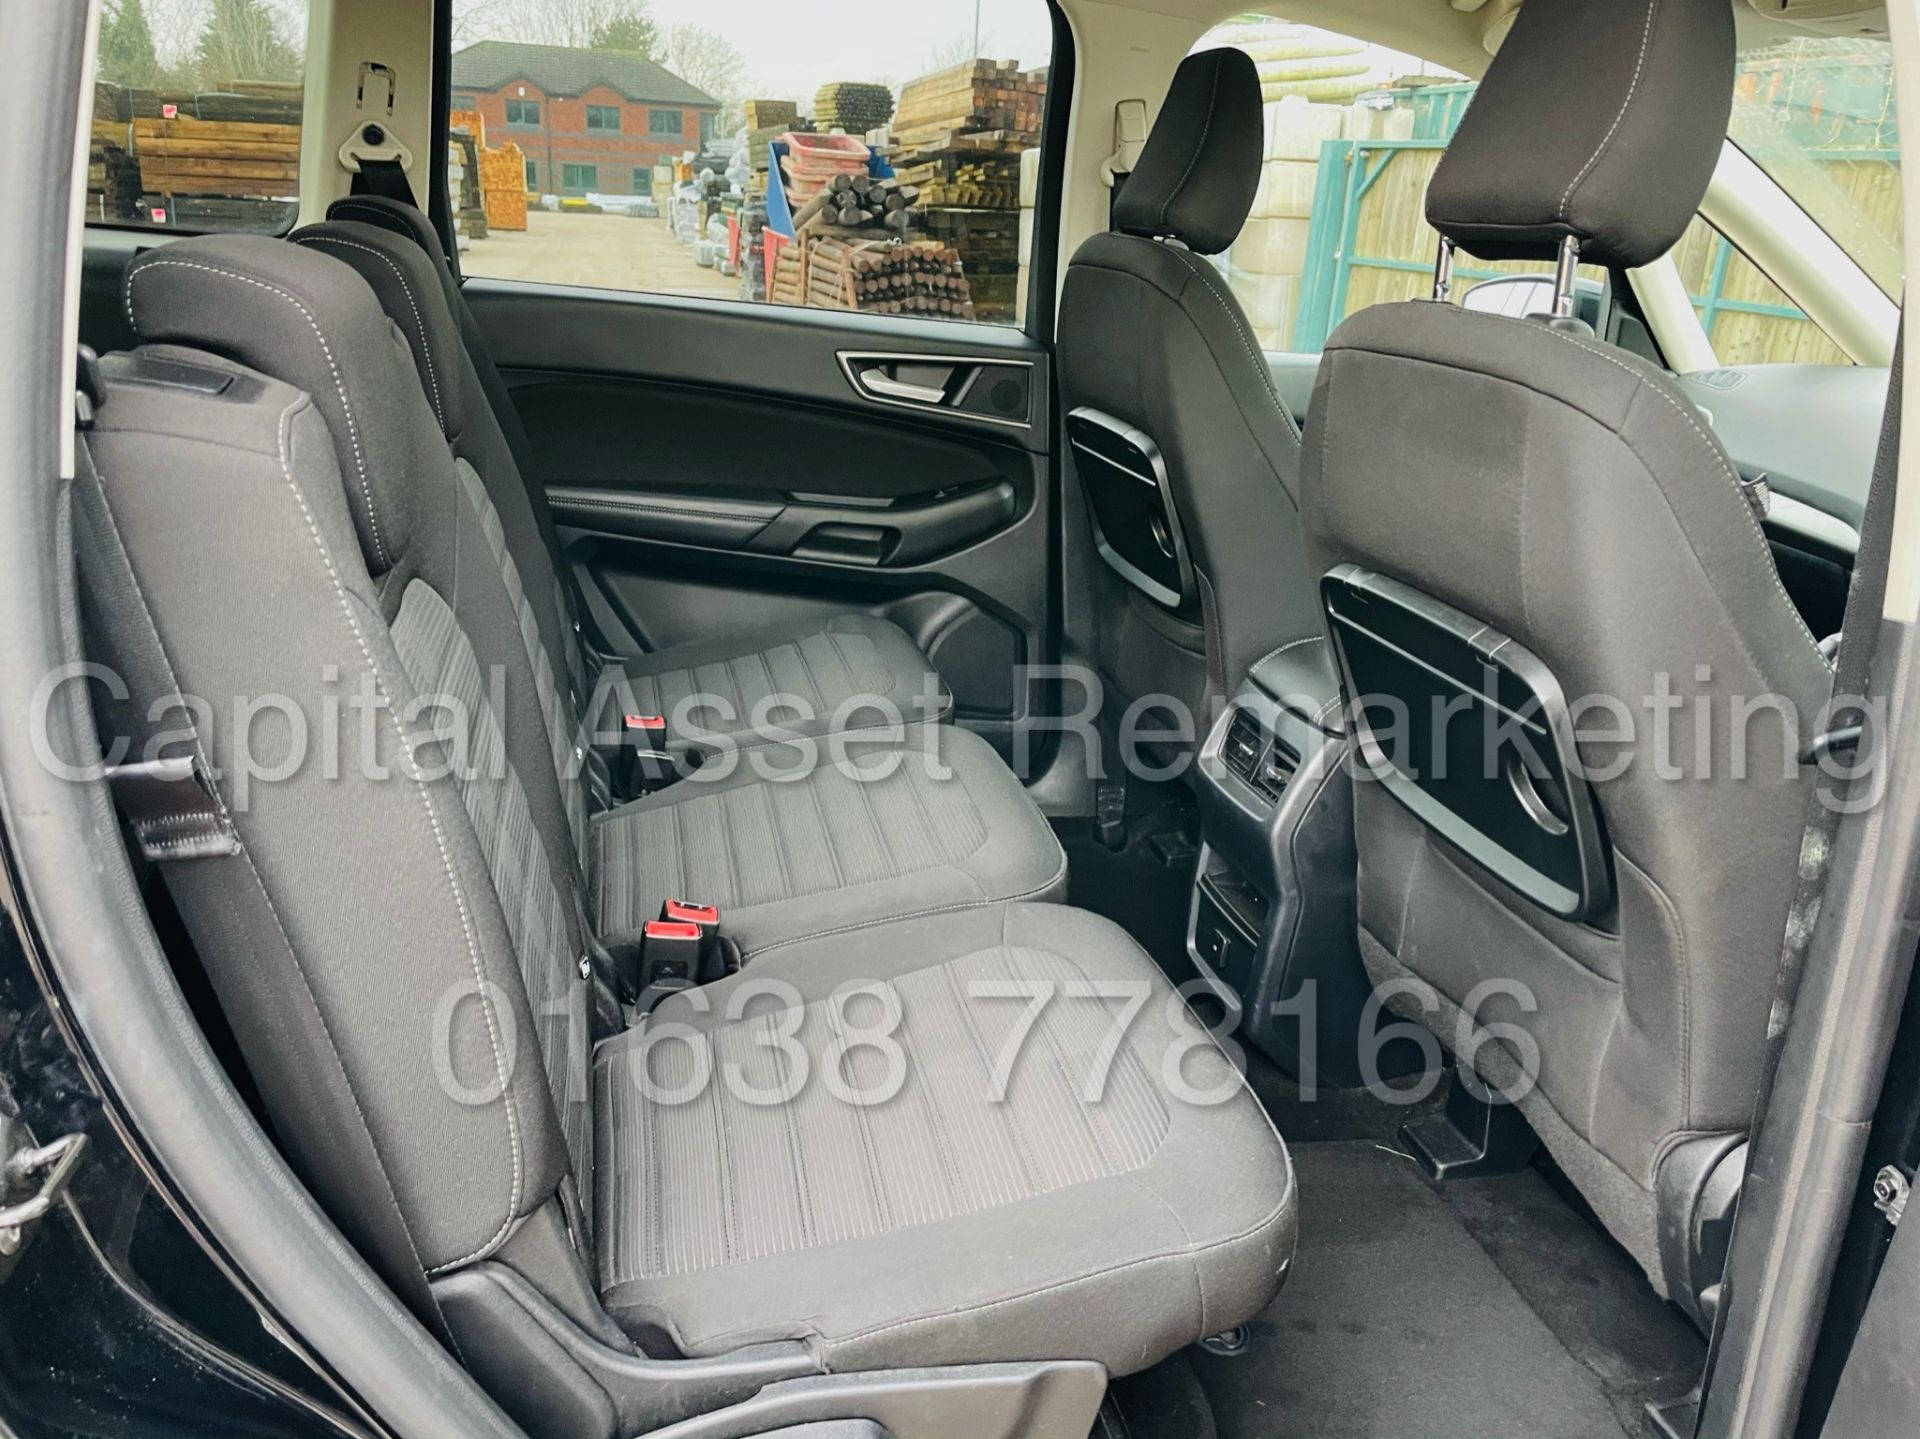 ON SALE FORD GALAXY *ZETEC EDITION* 7 SEATER MPV (2017 - EURO 6) '2.0 TDCI - AUTO' (- FULL HISTORY) - Image 29 of 48